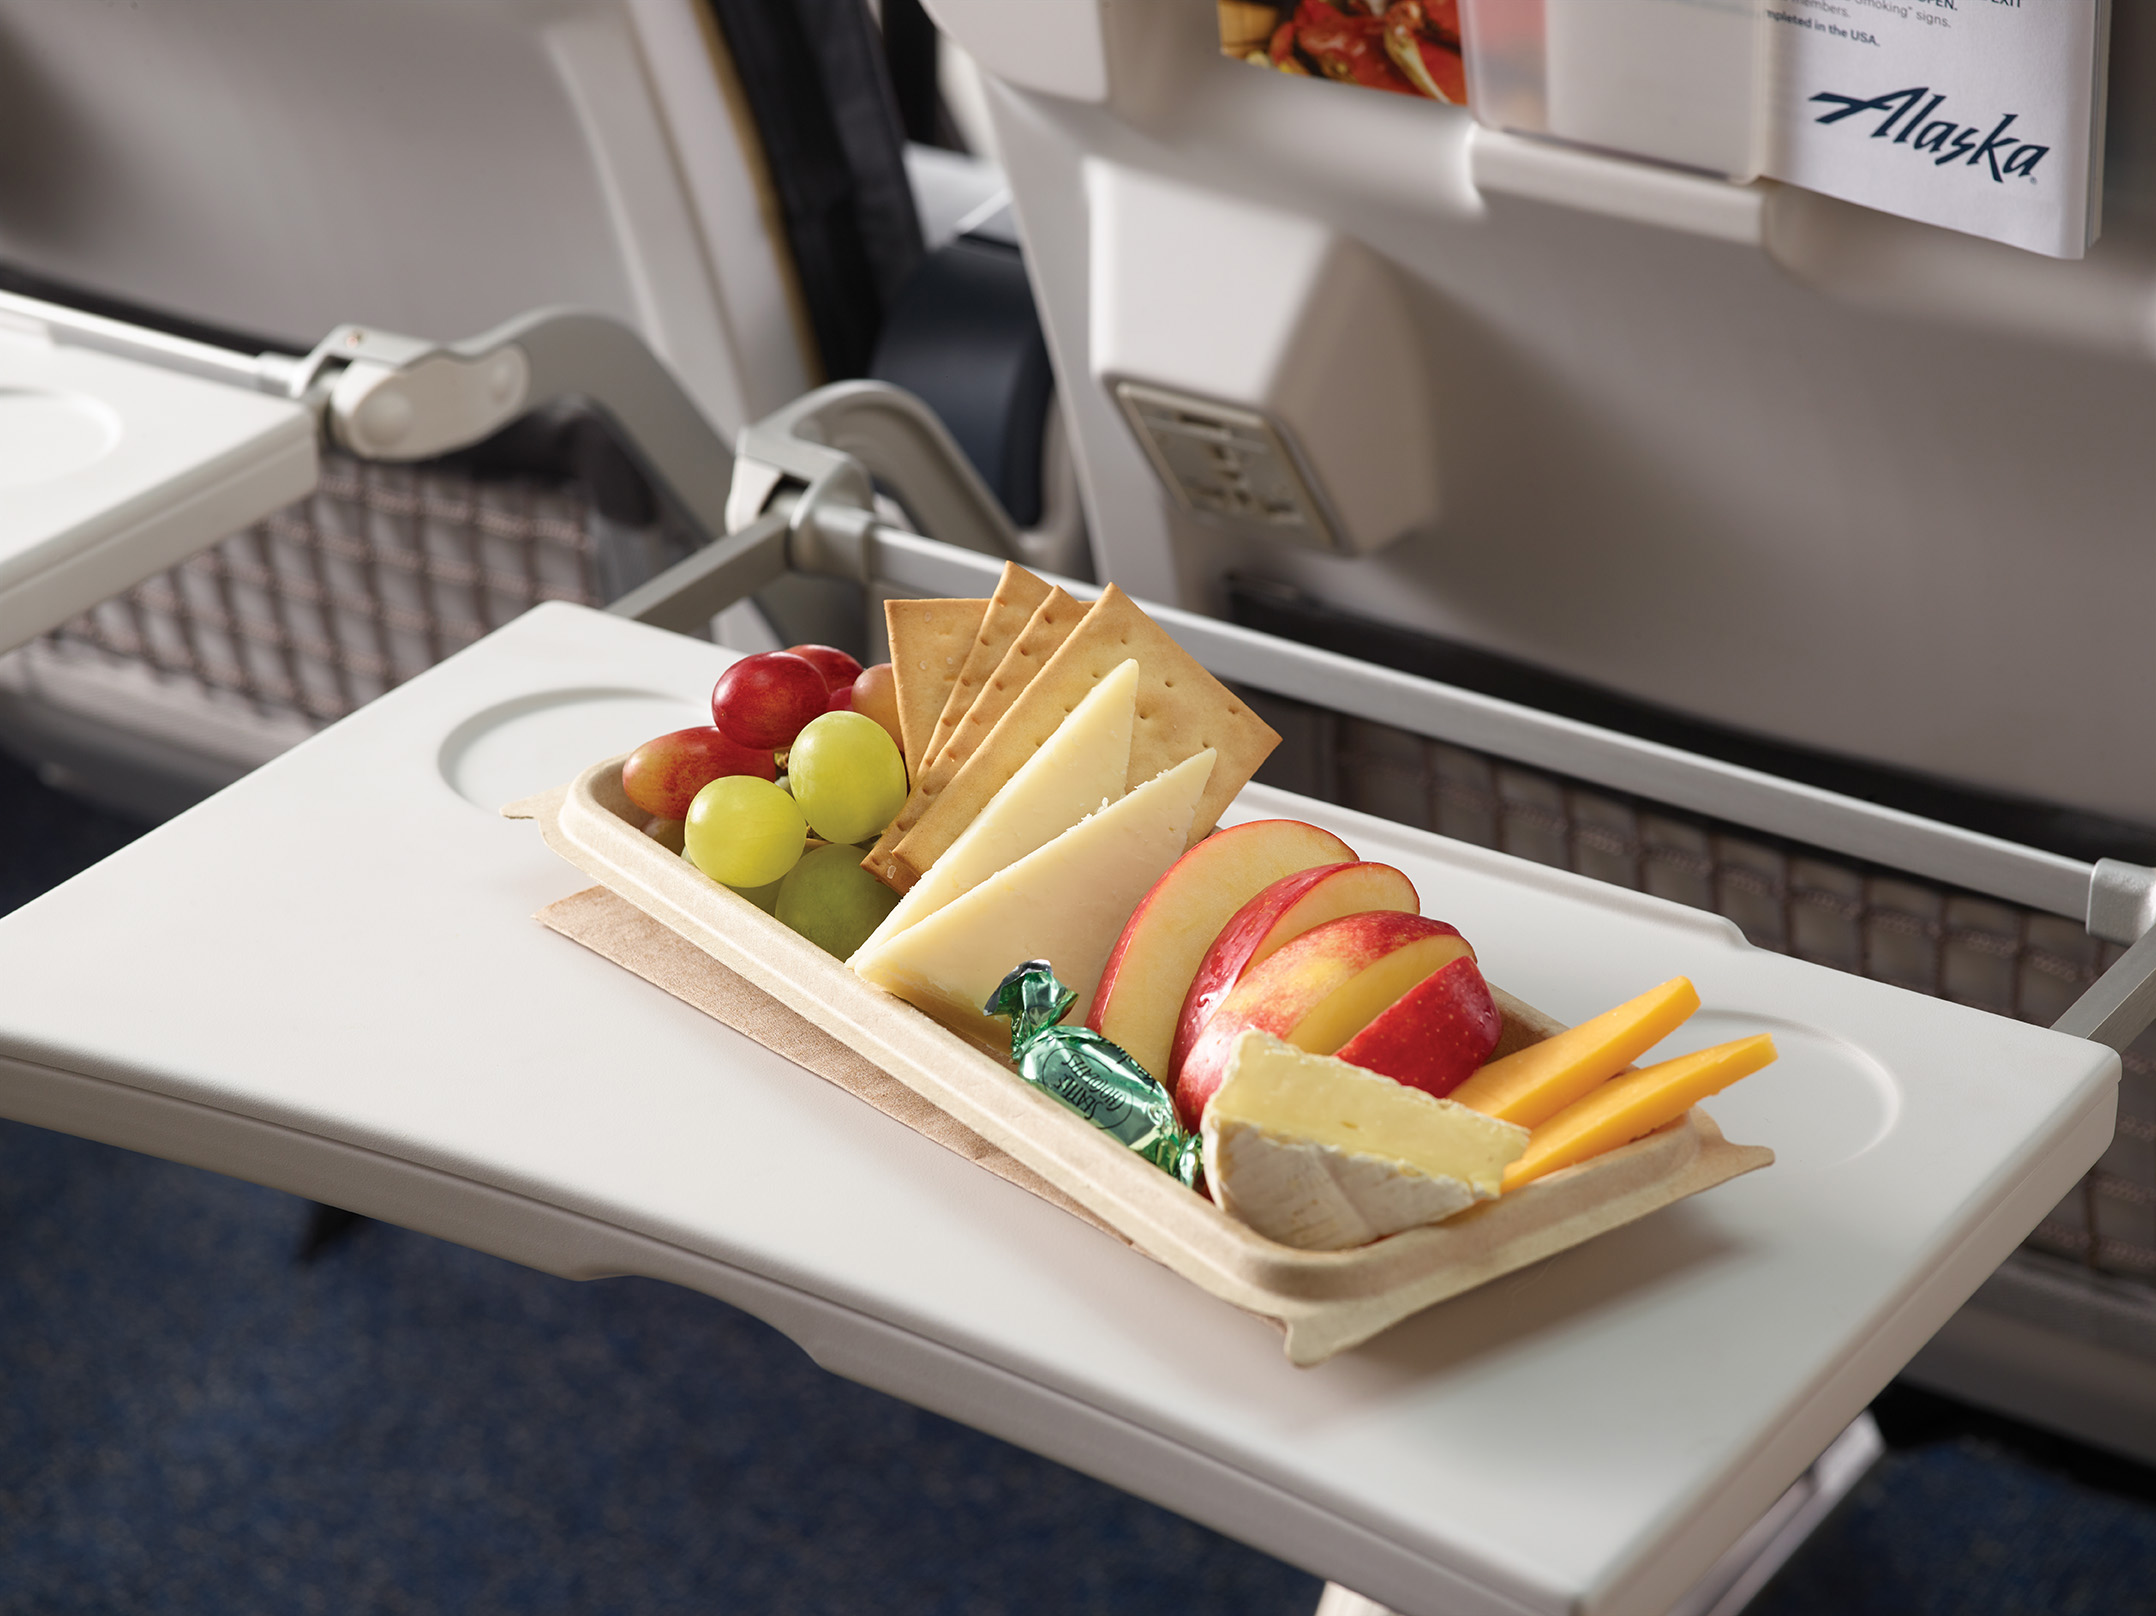 On Alaska flights, customers can savor hot entrees created by award-winning chef Tom Douglas, nosh Alaska’s Signature Fruit and Cheese Platter featuring Beecher’s Flagship, and sip on premium Northwest wines. 